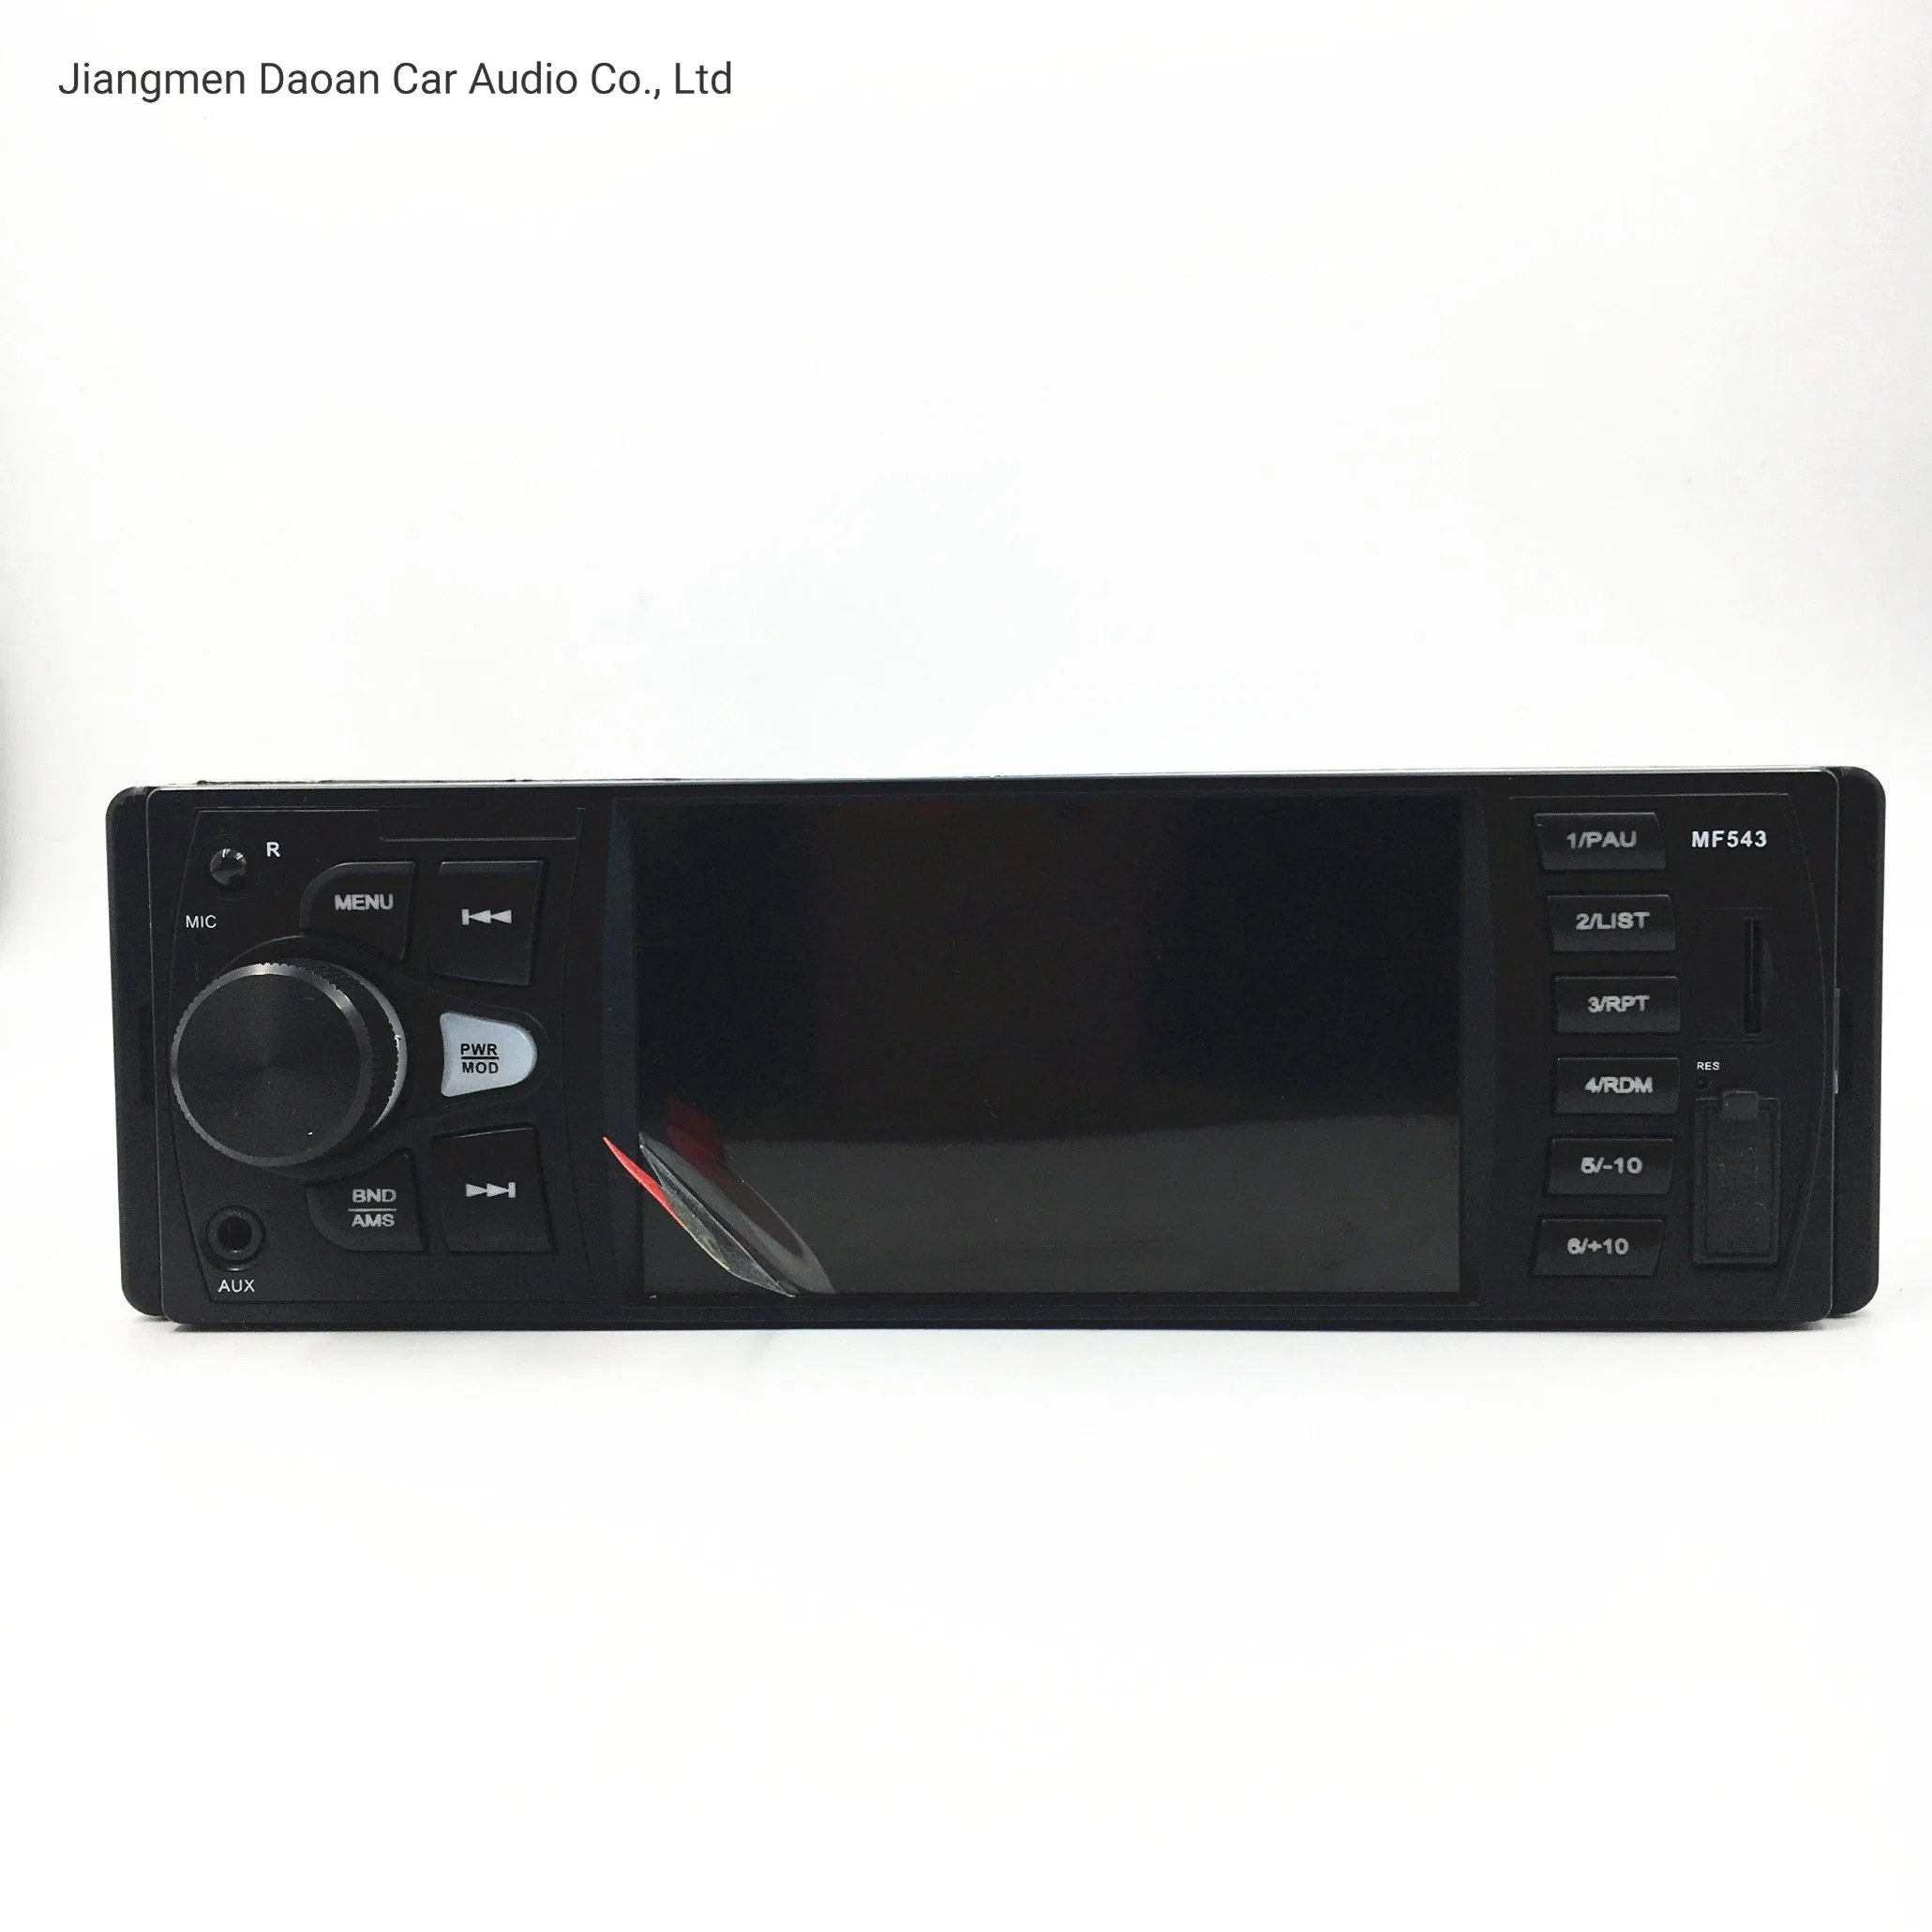 4.0 Inch Bluetooth Car MP5 Audio Player with Remote